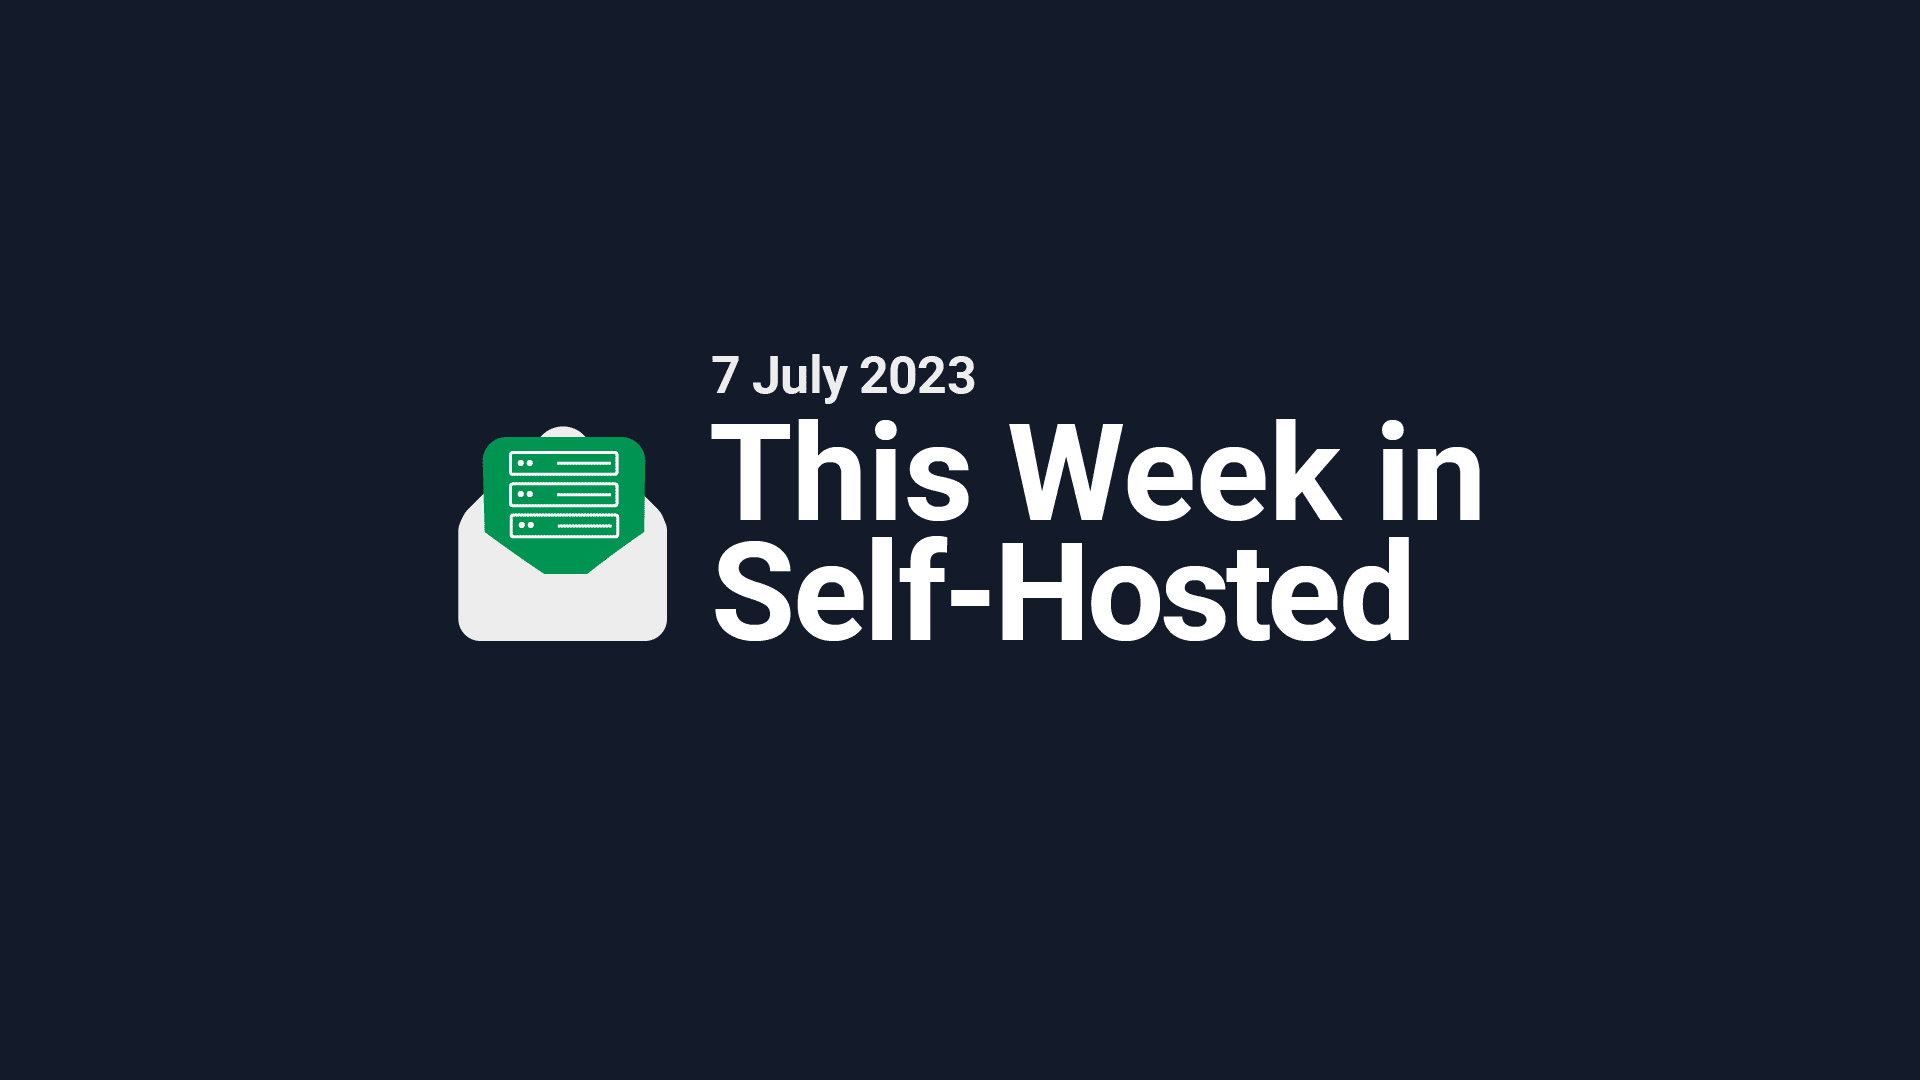 This Week in Self-Hosted (7 July 2023) Post image